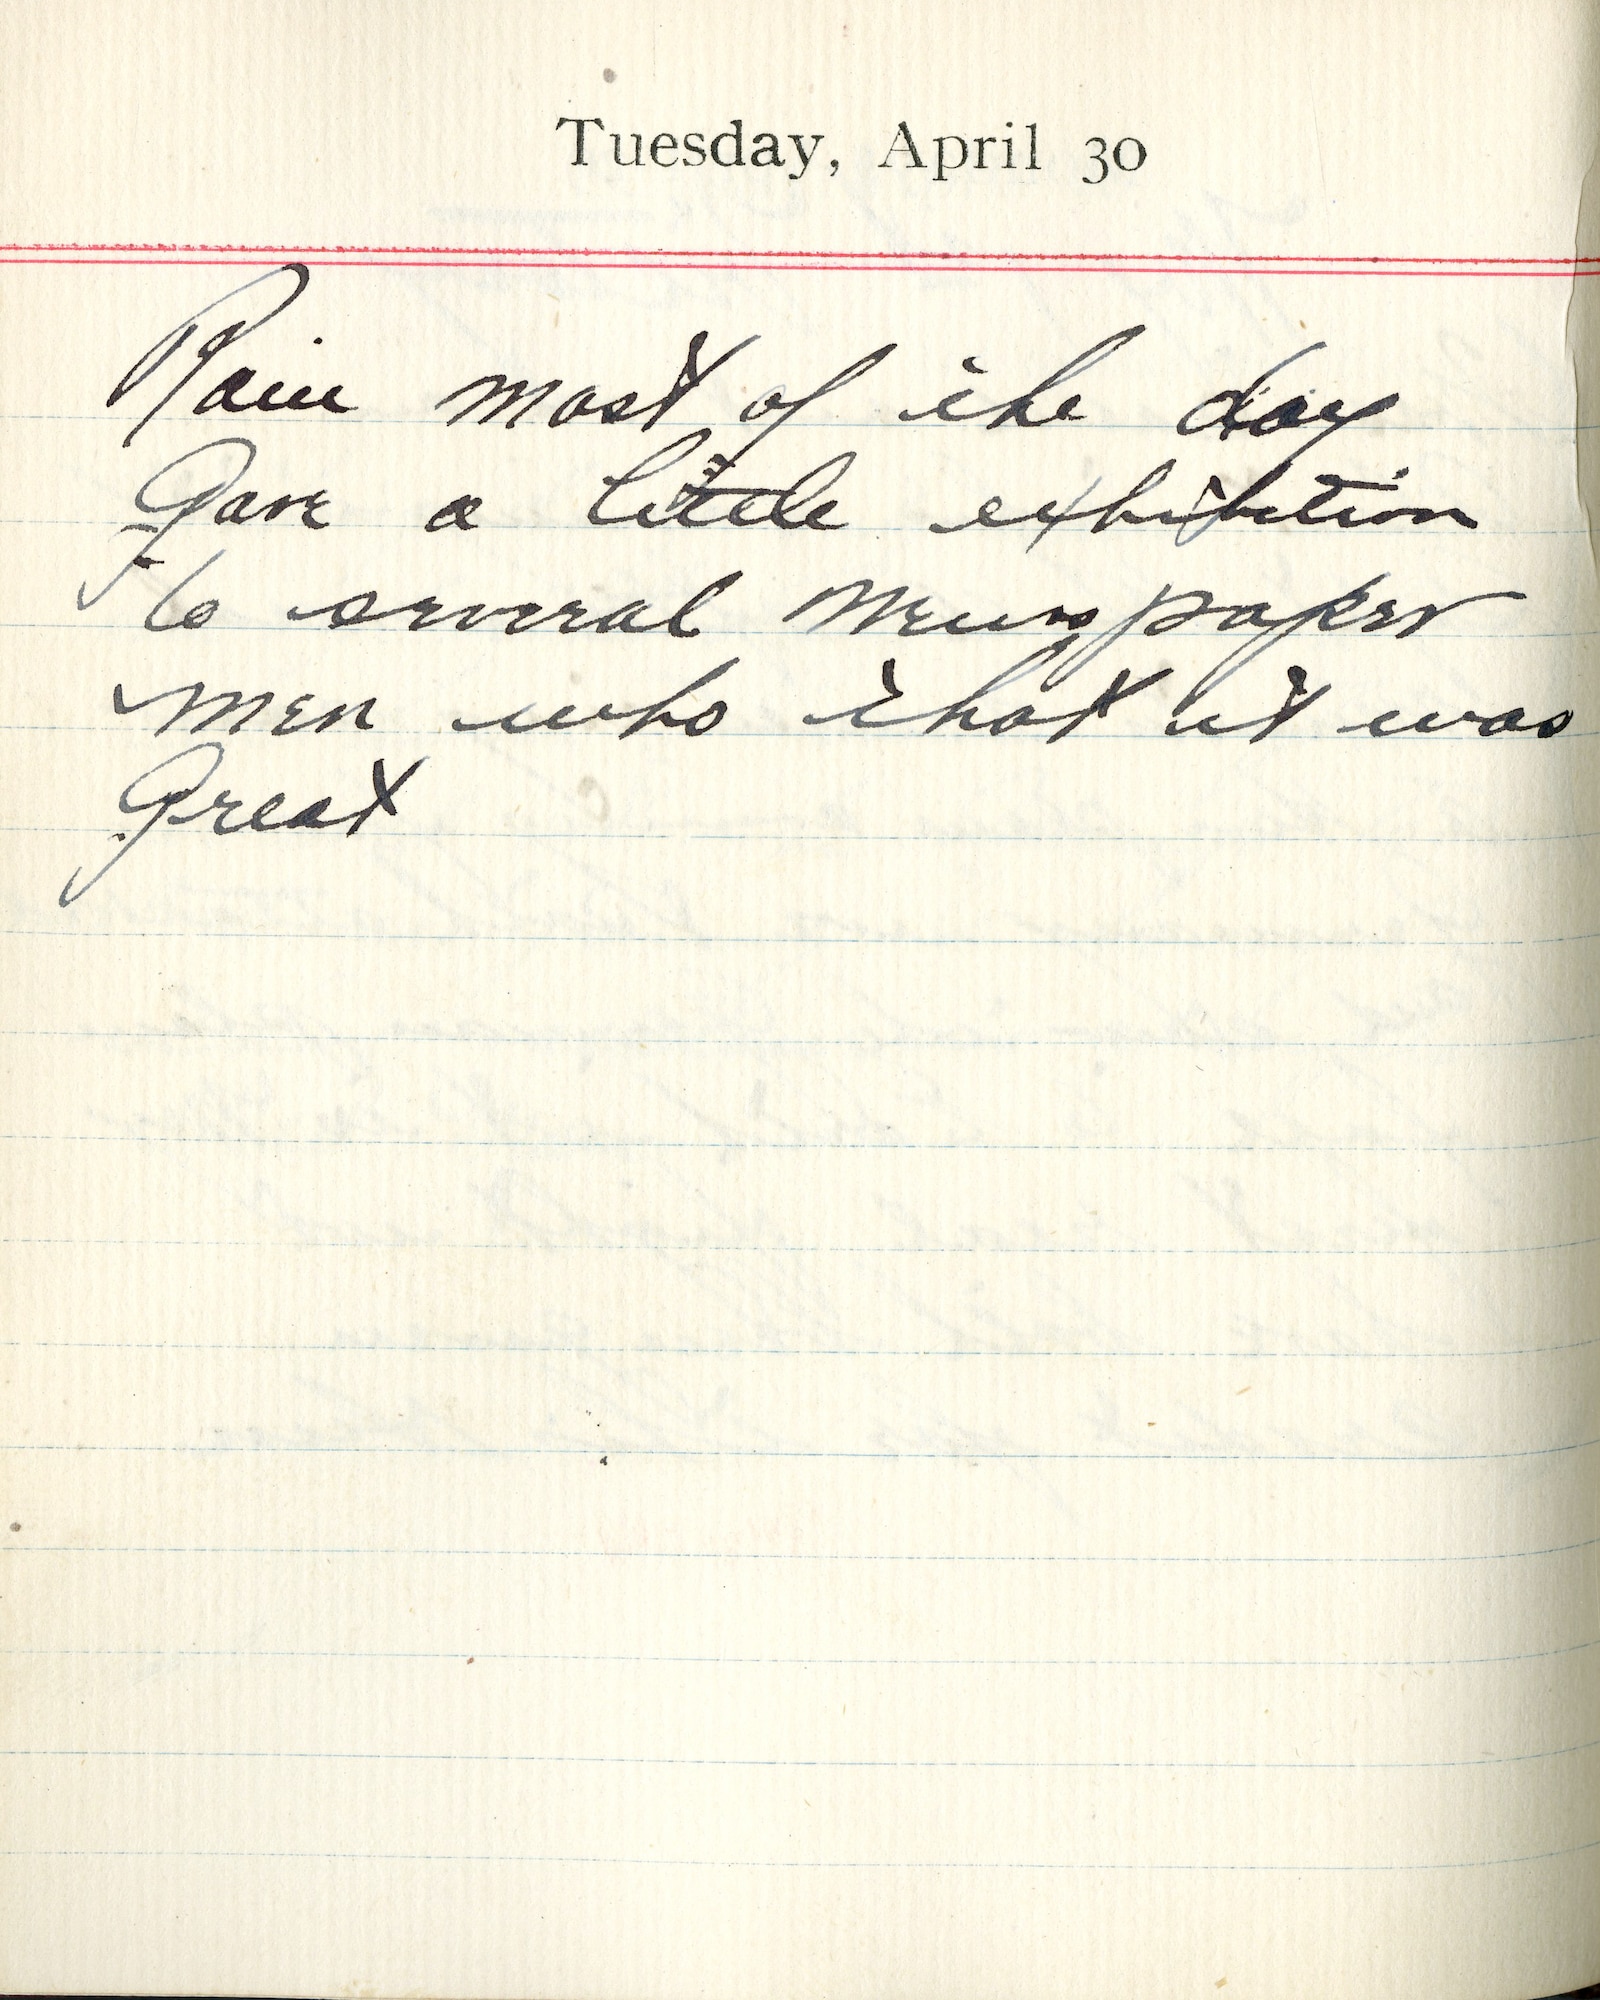 Capt. Edward V. Rickenbacker's 1918 wartime diary entry. (04/30/1918) Rain most of the day.  Gave a little exhibition to several newspaper men who thought it was great.